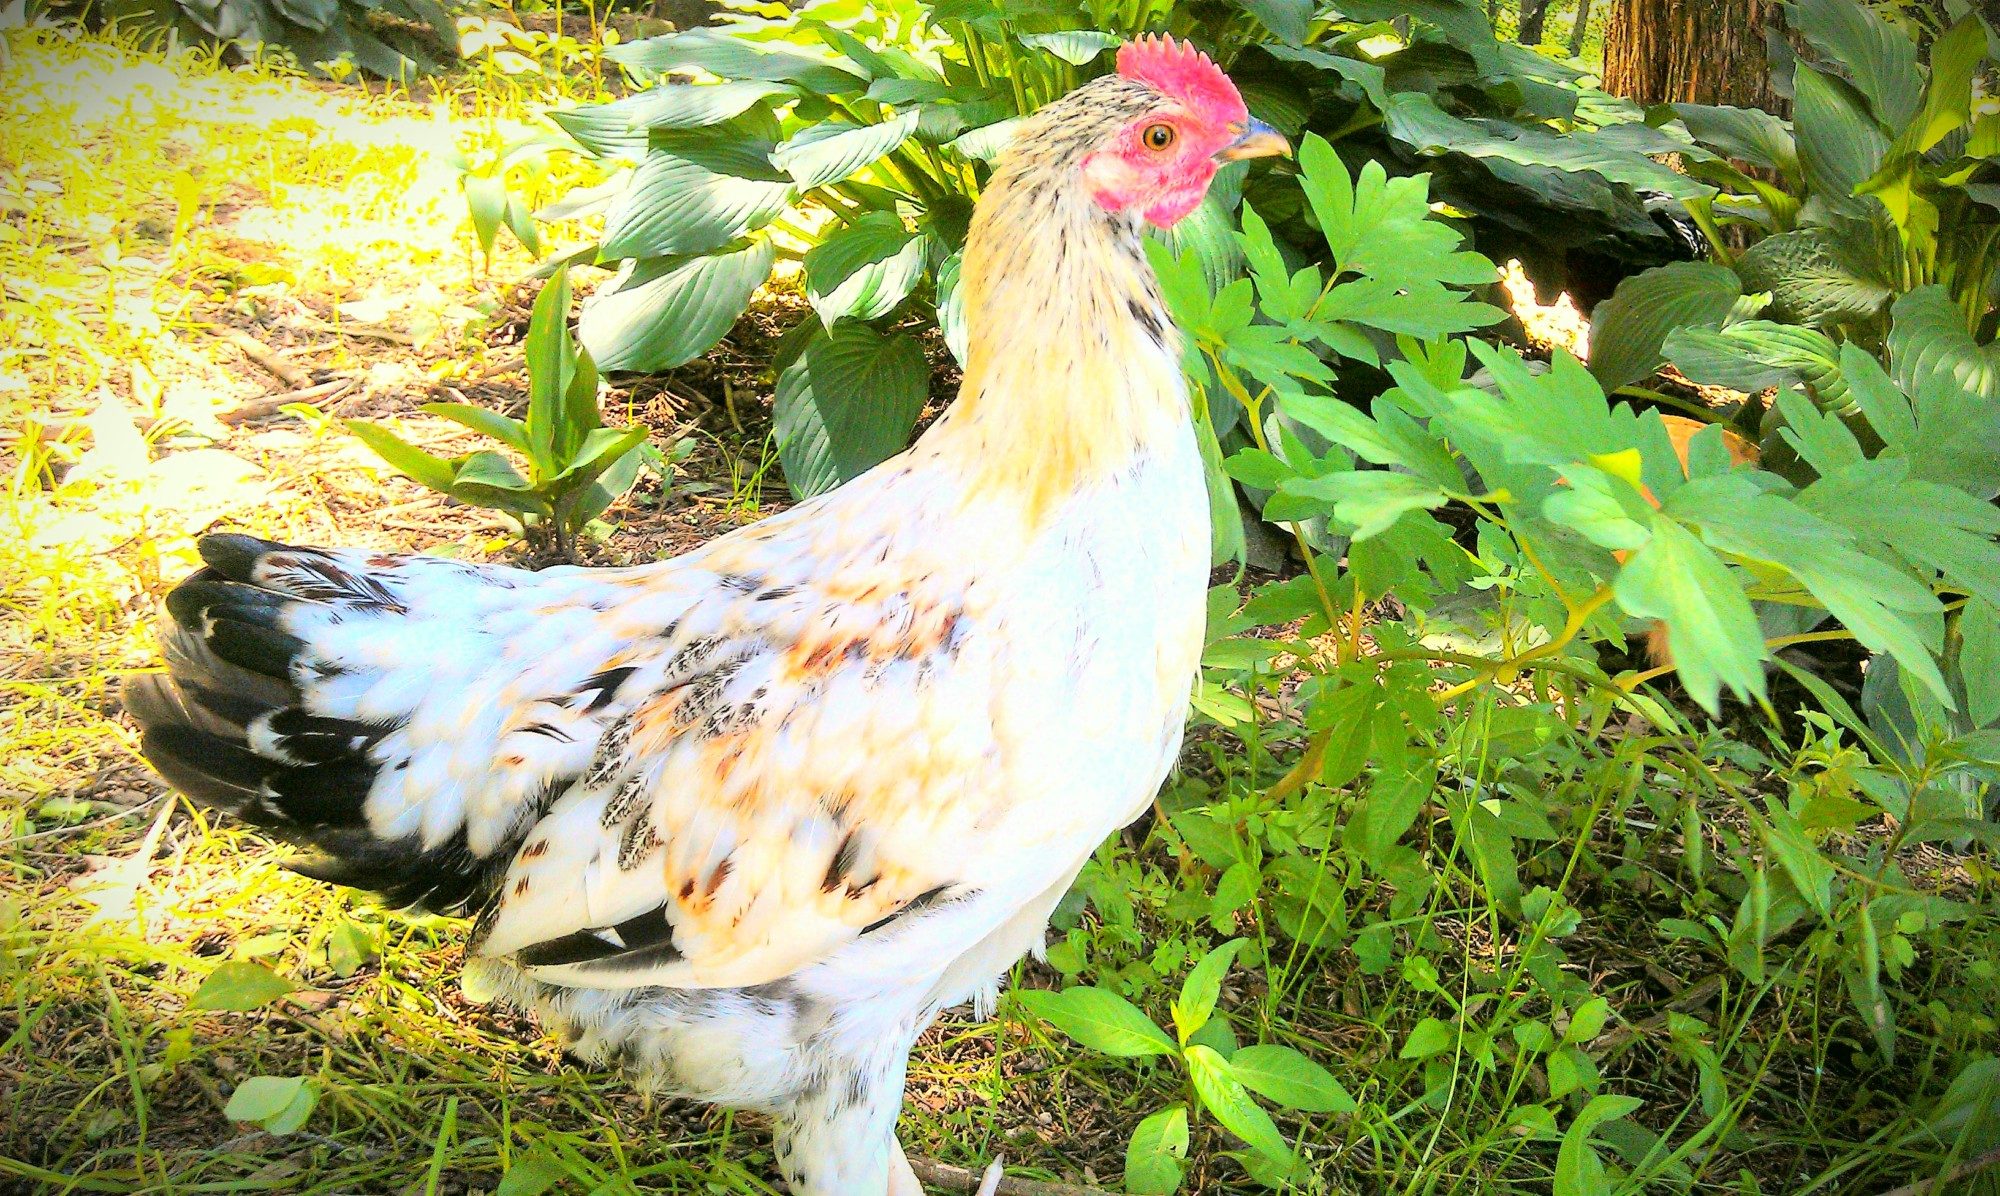 Summer 2014. My sweet Pip, ruler of the roost in the "chick coop" had to move in with a new flock because we couldn't keep 2 roosters (said someone in the family;)) He's now the happy head honcho over a flock of 8 rhode island reds who have made his transition as easy as he could ever wish for:) In exchange, we got their boss hen Big Mama since she & Pip just weren't feelin' the love. She's now our top egg layer & social to boot:)